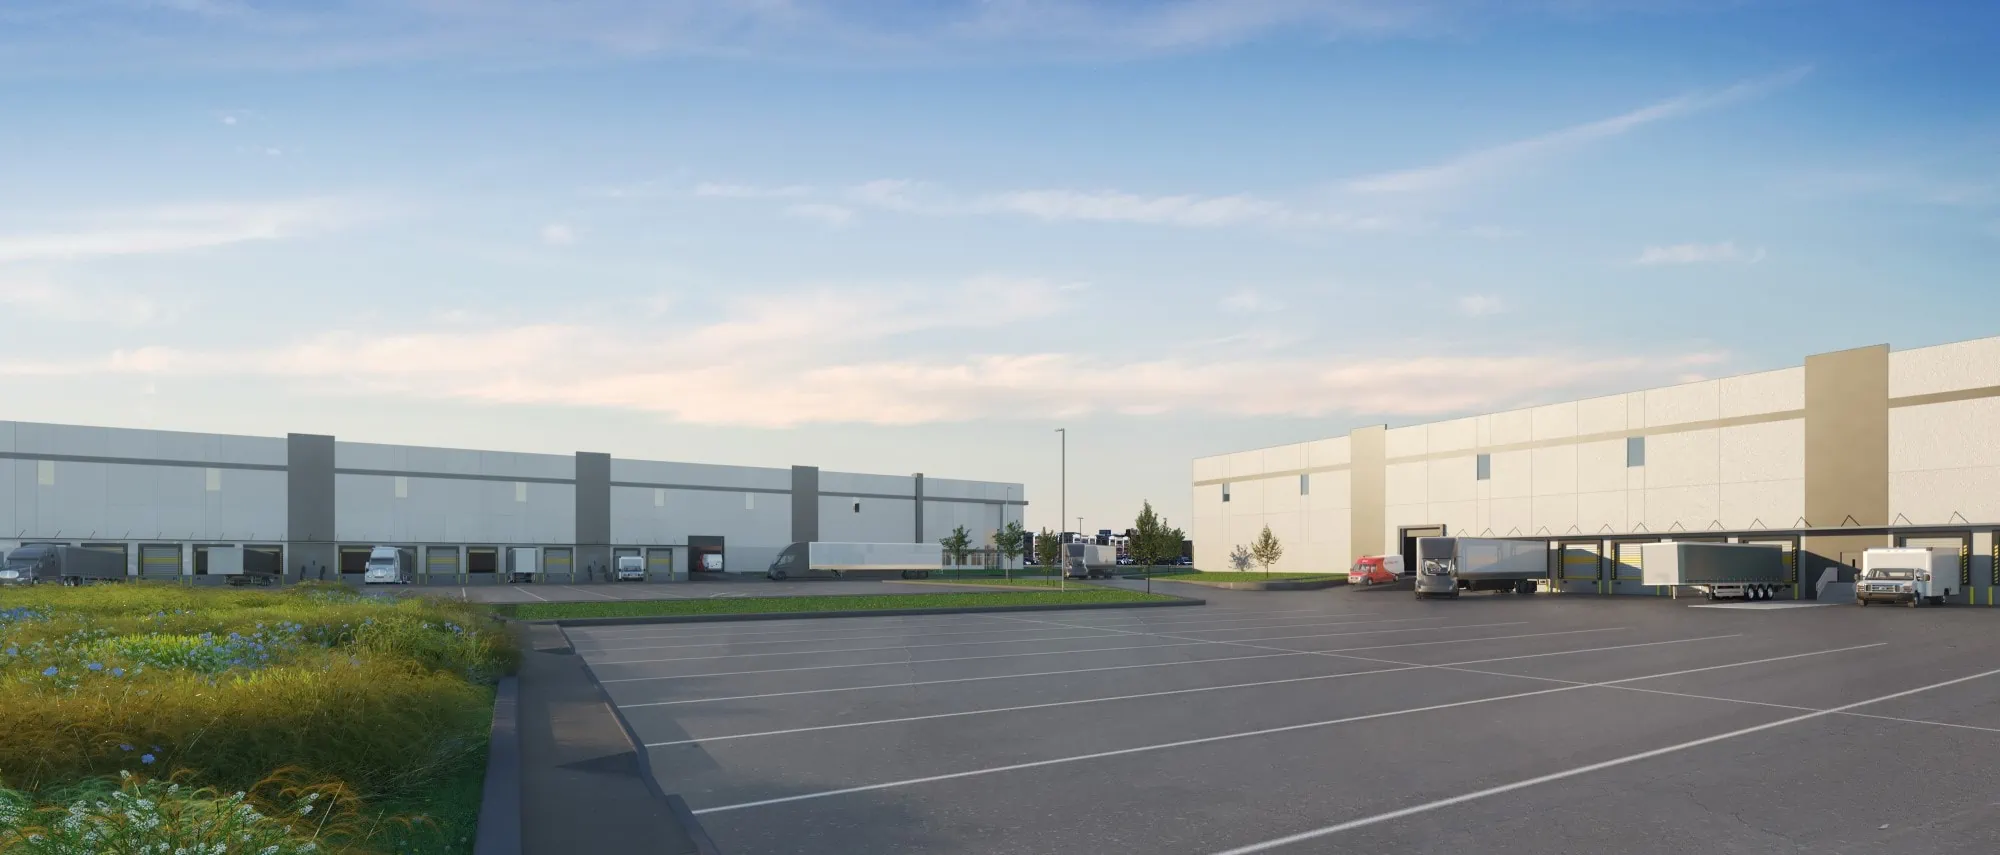 Rendering of semi truck loading area at 5000 Richmond